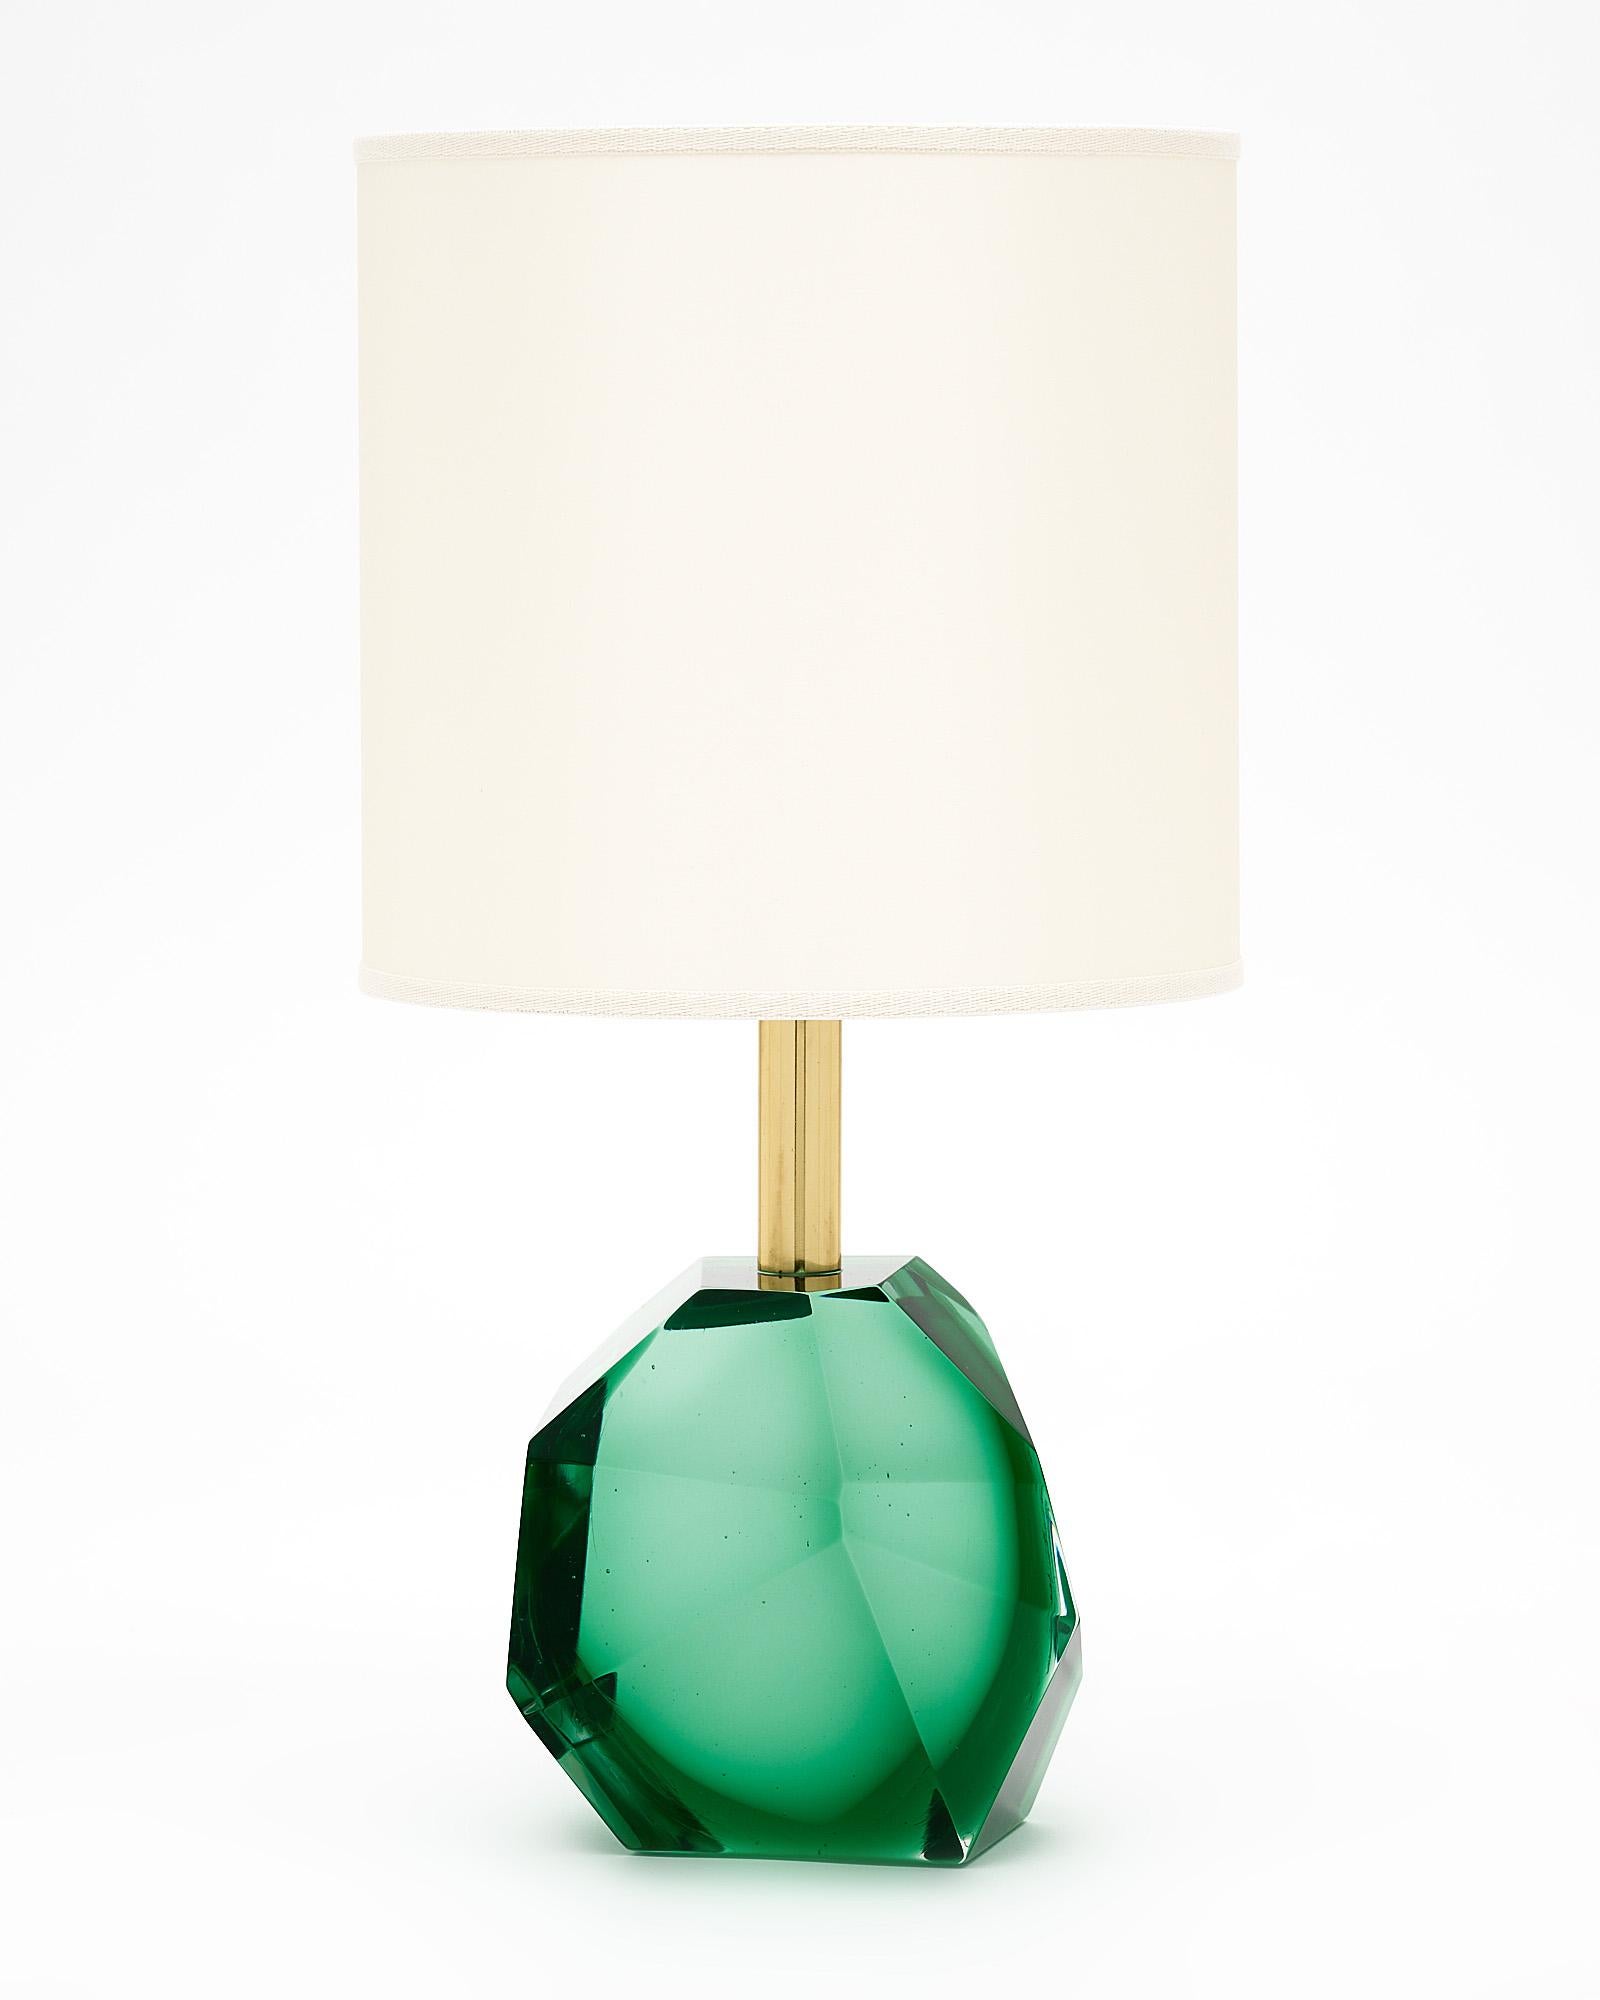 Murano glass green rock lamps signed by Alberto Dona. We love the modernity of the lamps; the abstract form, and the high decorative impact of this dynamic pair. They have been newly wired to fit US standards.